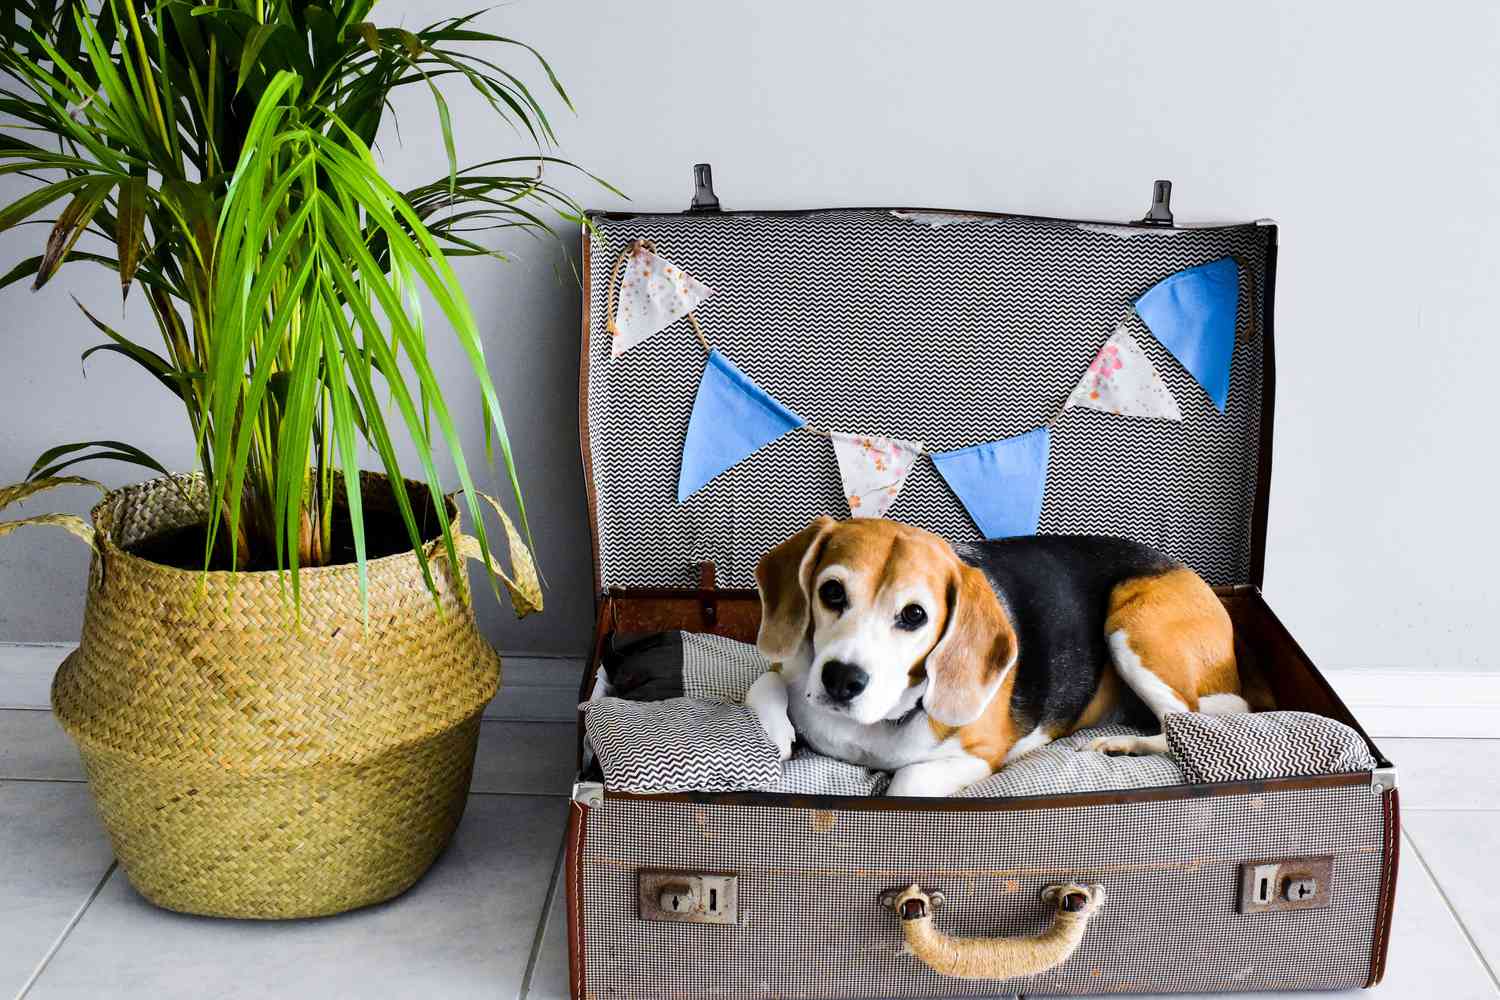 dog in suitcase